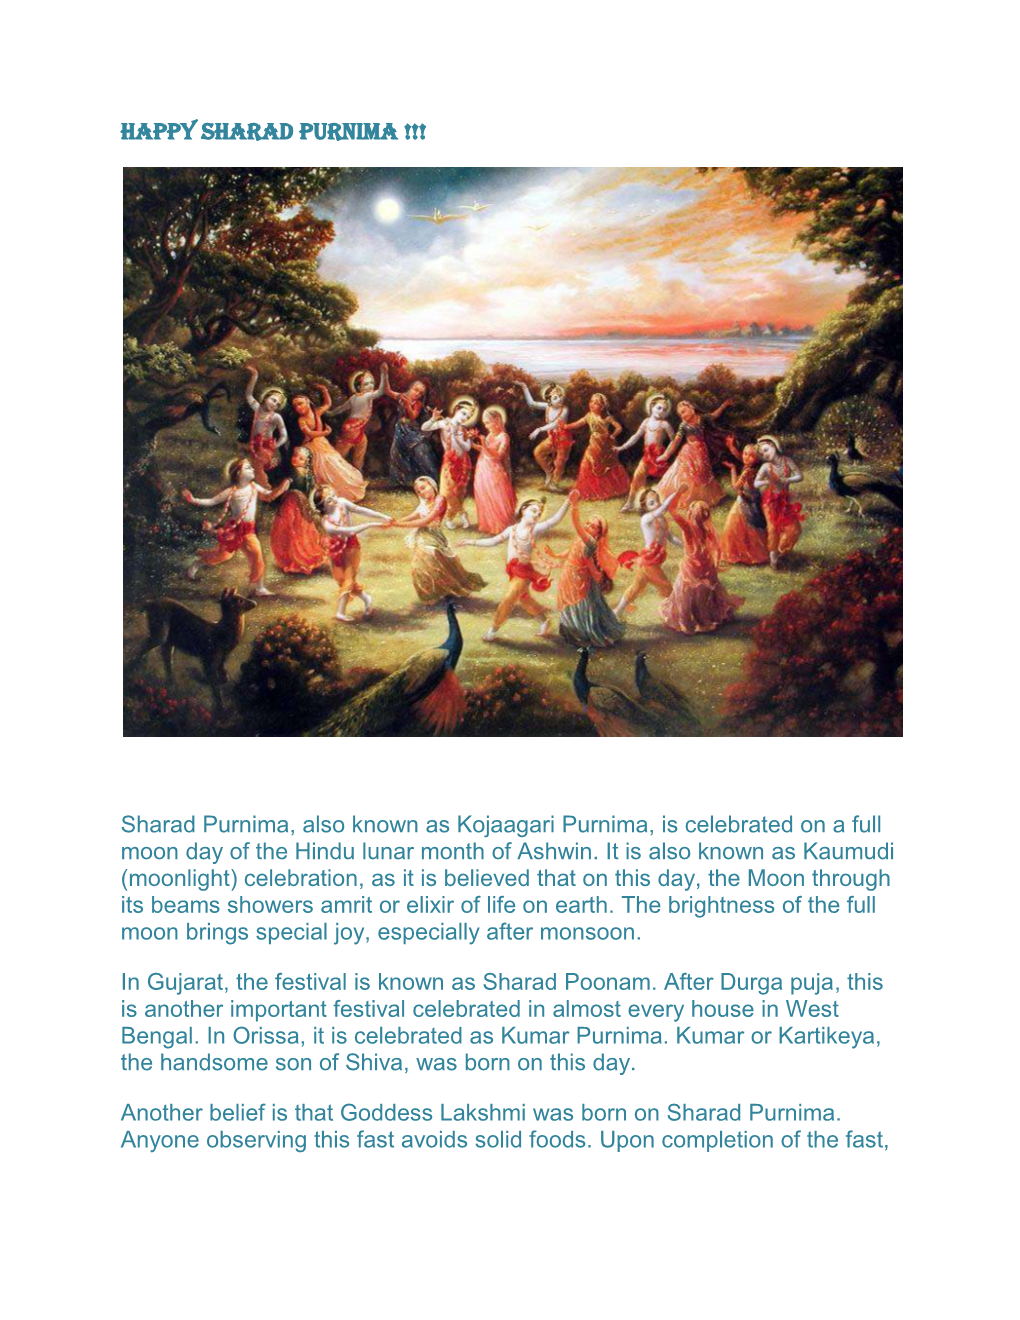 Sharad Purnima, Also Known As Kojaagari Purnima, Is Celebrated on a Full Moon Day of the Hindu Lunar Month of Ashwin